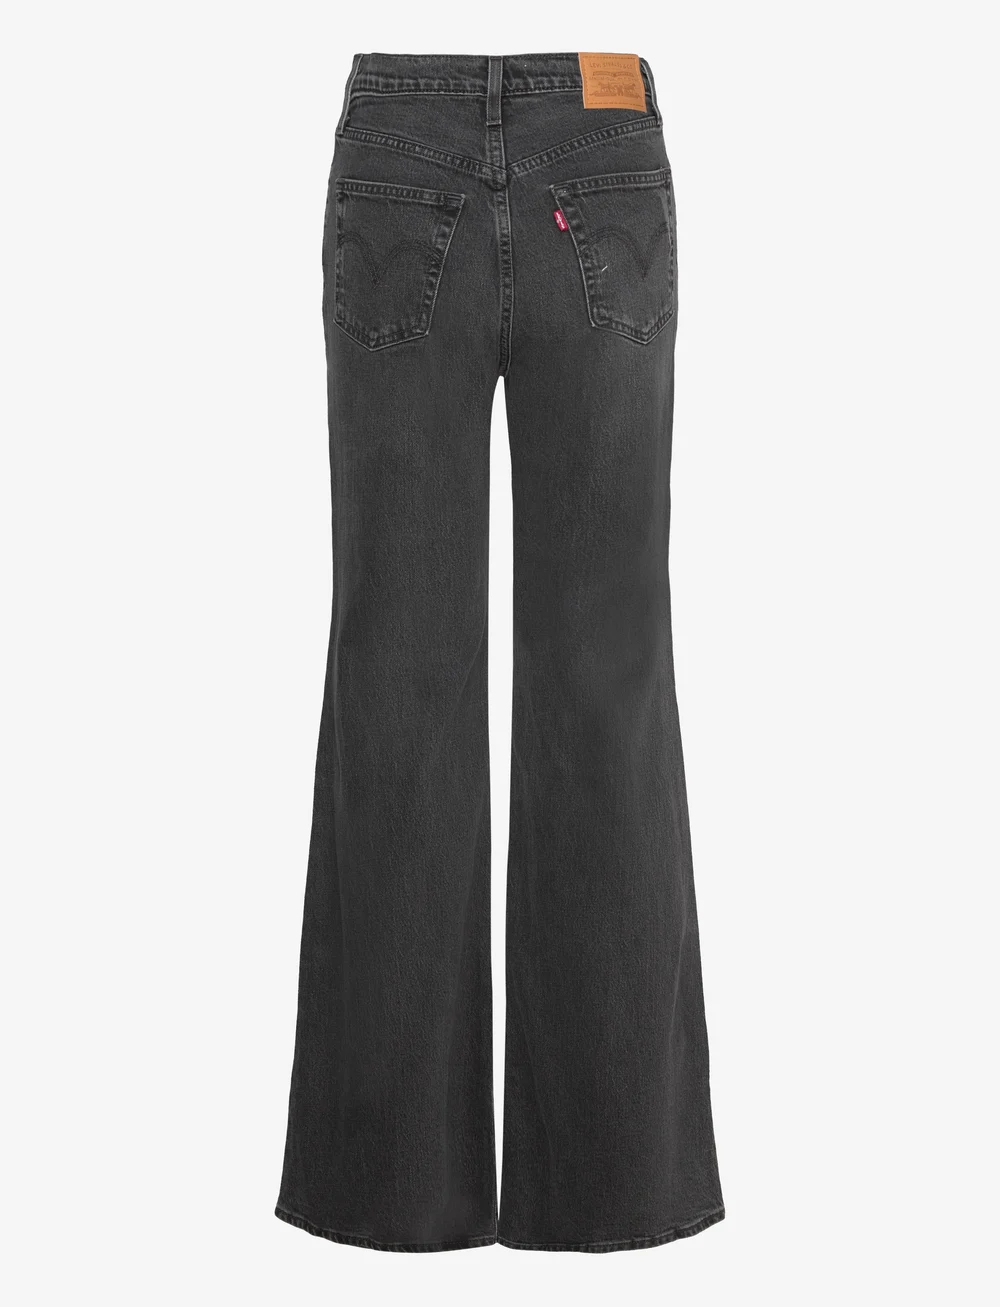 Levi's® Women's Ribcage Bell Jeans - On The Town - Black